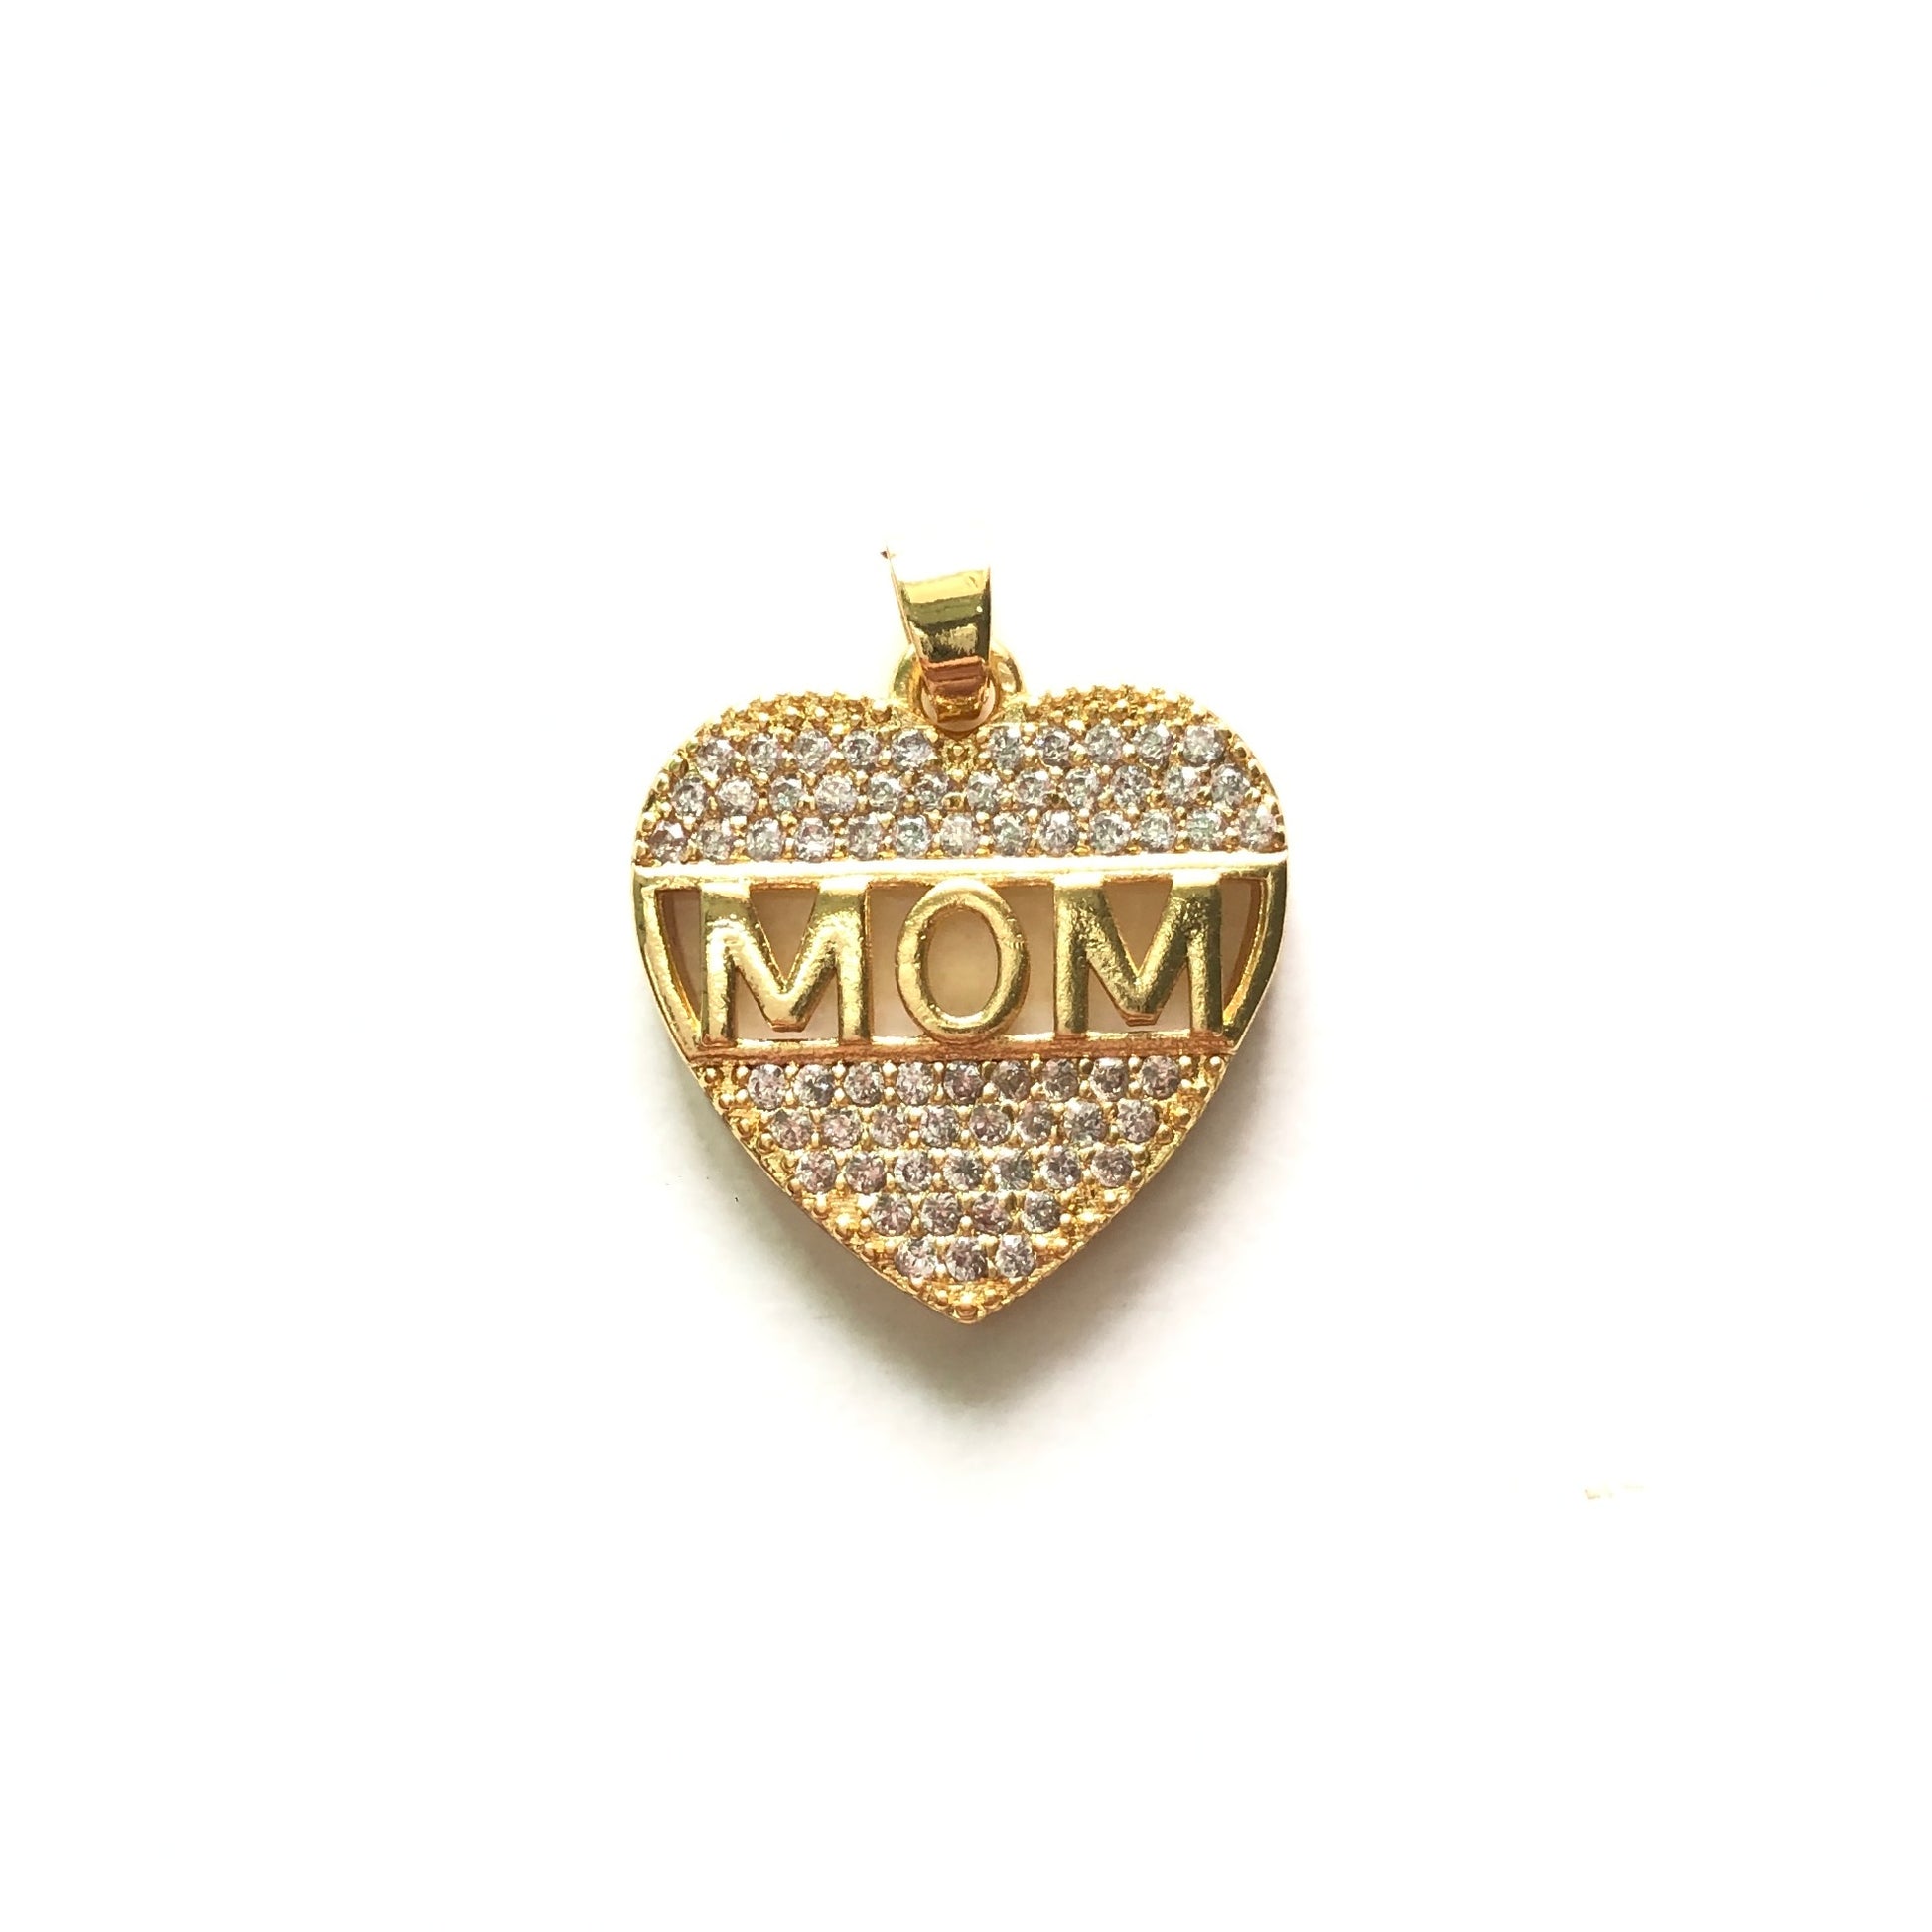 10pcs/lot 18*17mm CZ Paved Mom Charms for Mother's Day Gold CZ Paved Charms Hearts Mother's Day Charms Beads Beyond